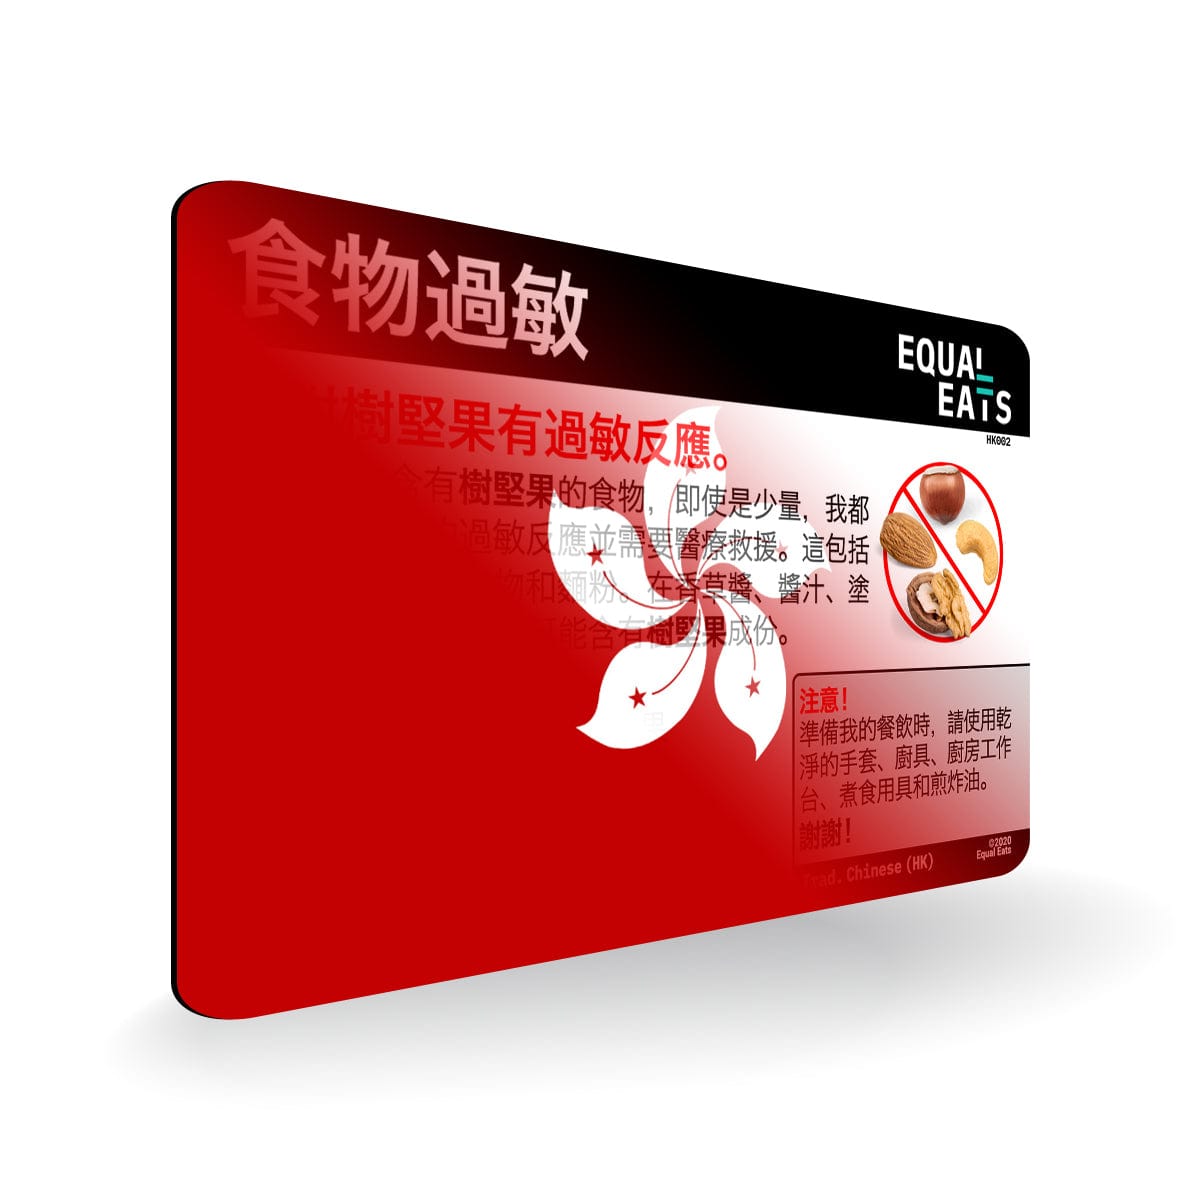 Traditional Chinese (Hong Kong) Tree Nut Allergy Card